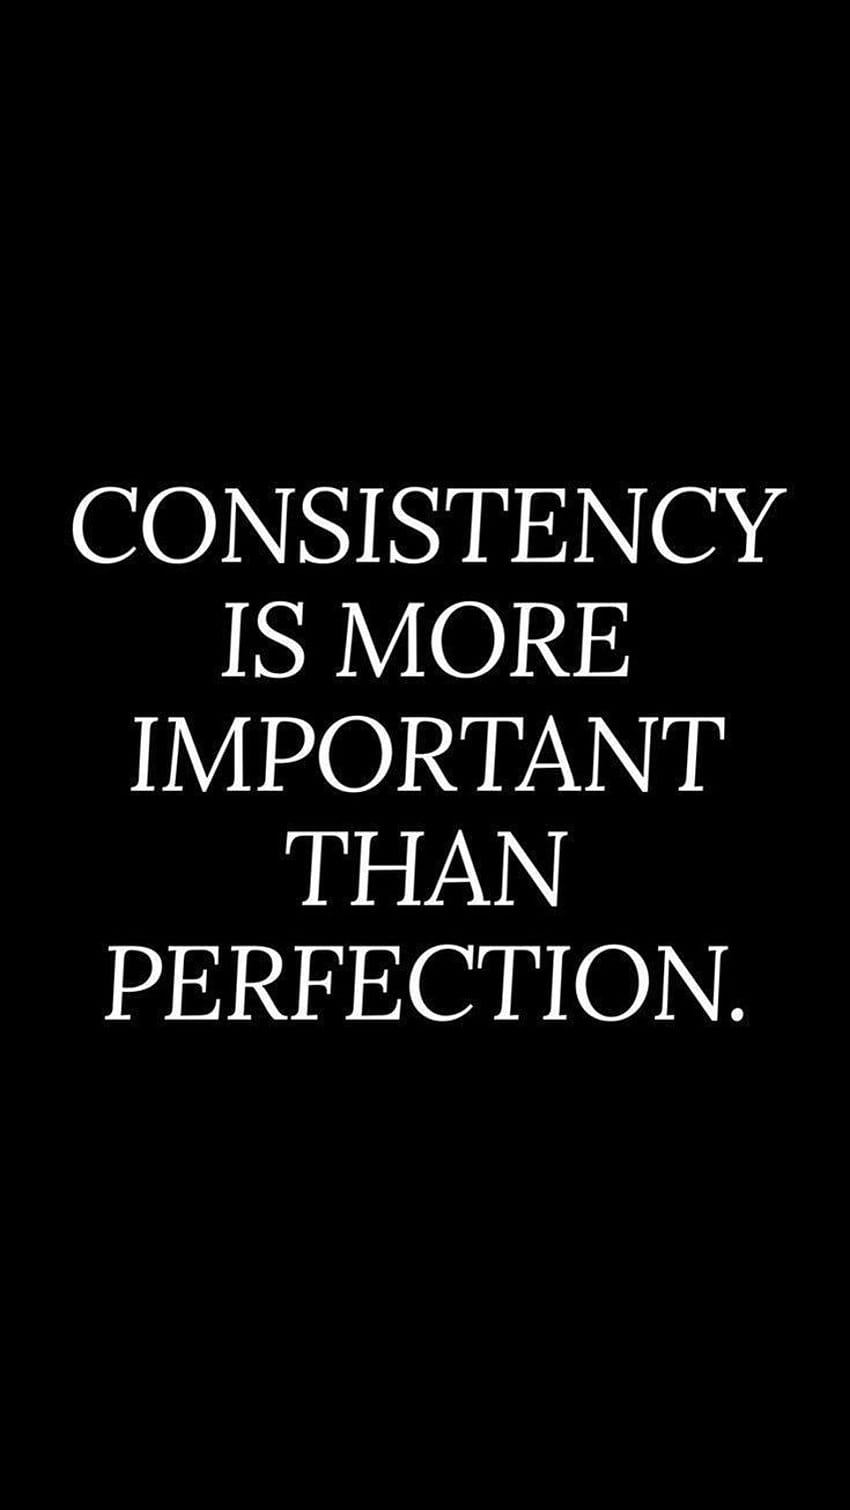 4320x900px, 4K Free download | Consistency is the DNA of mastery. Robin ...